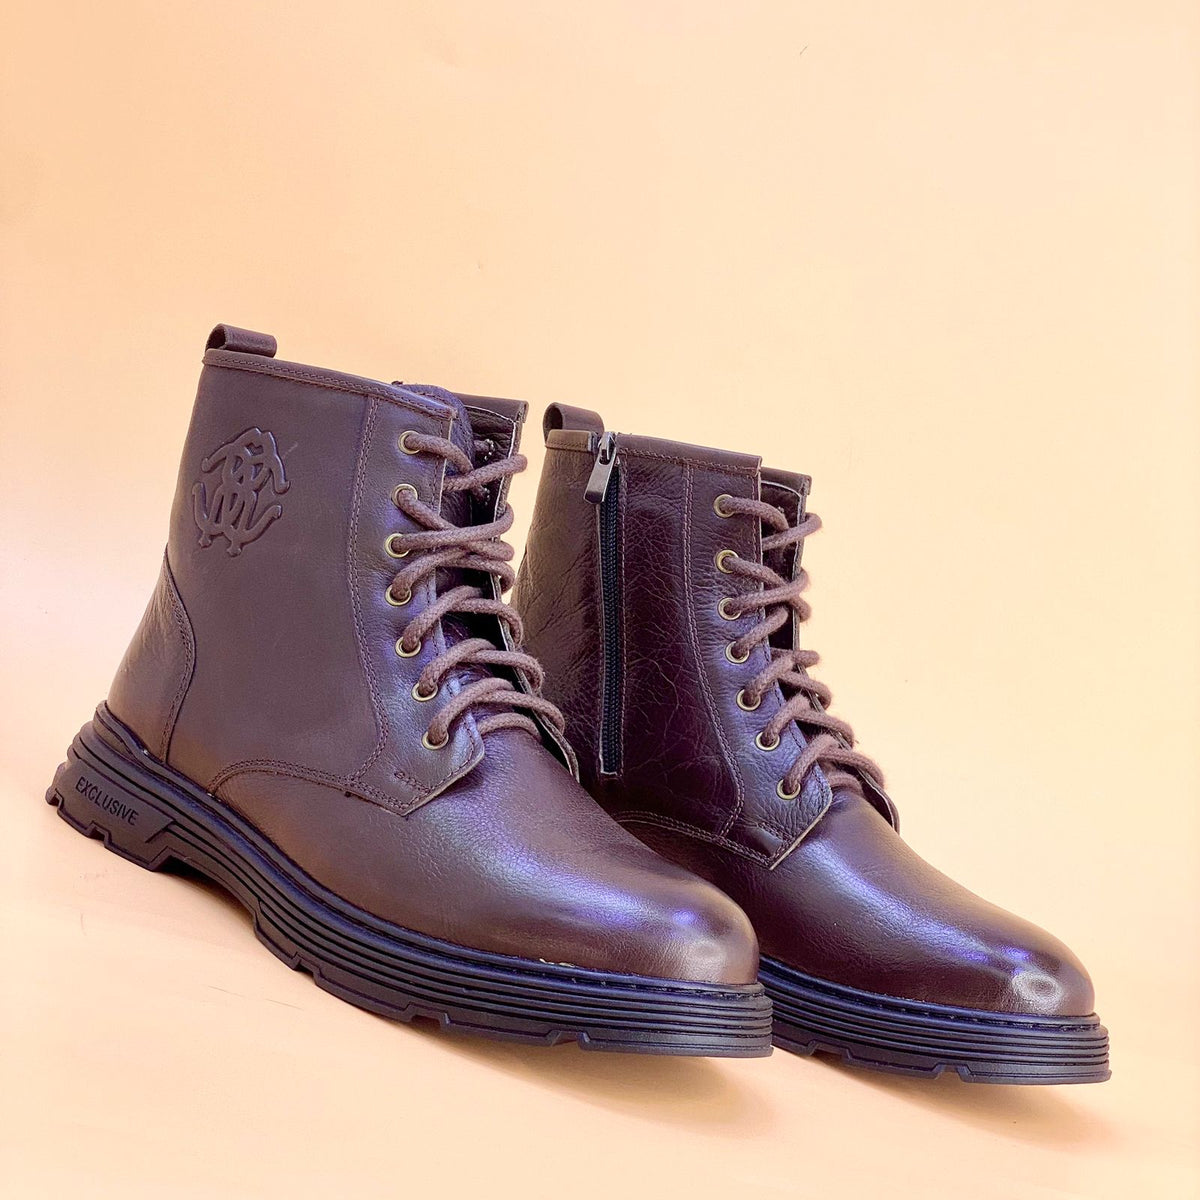 MADE IN TURKEY GENUINE LEATHER MEN BOOTS ON500